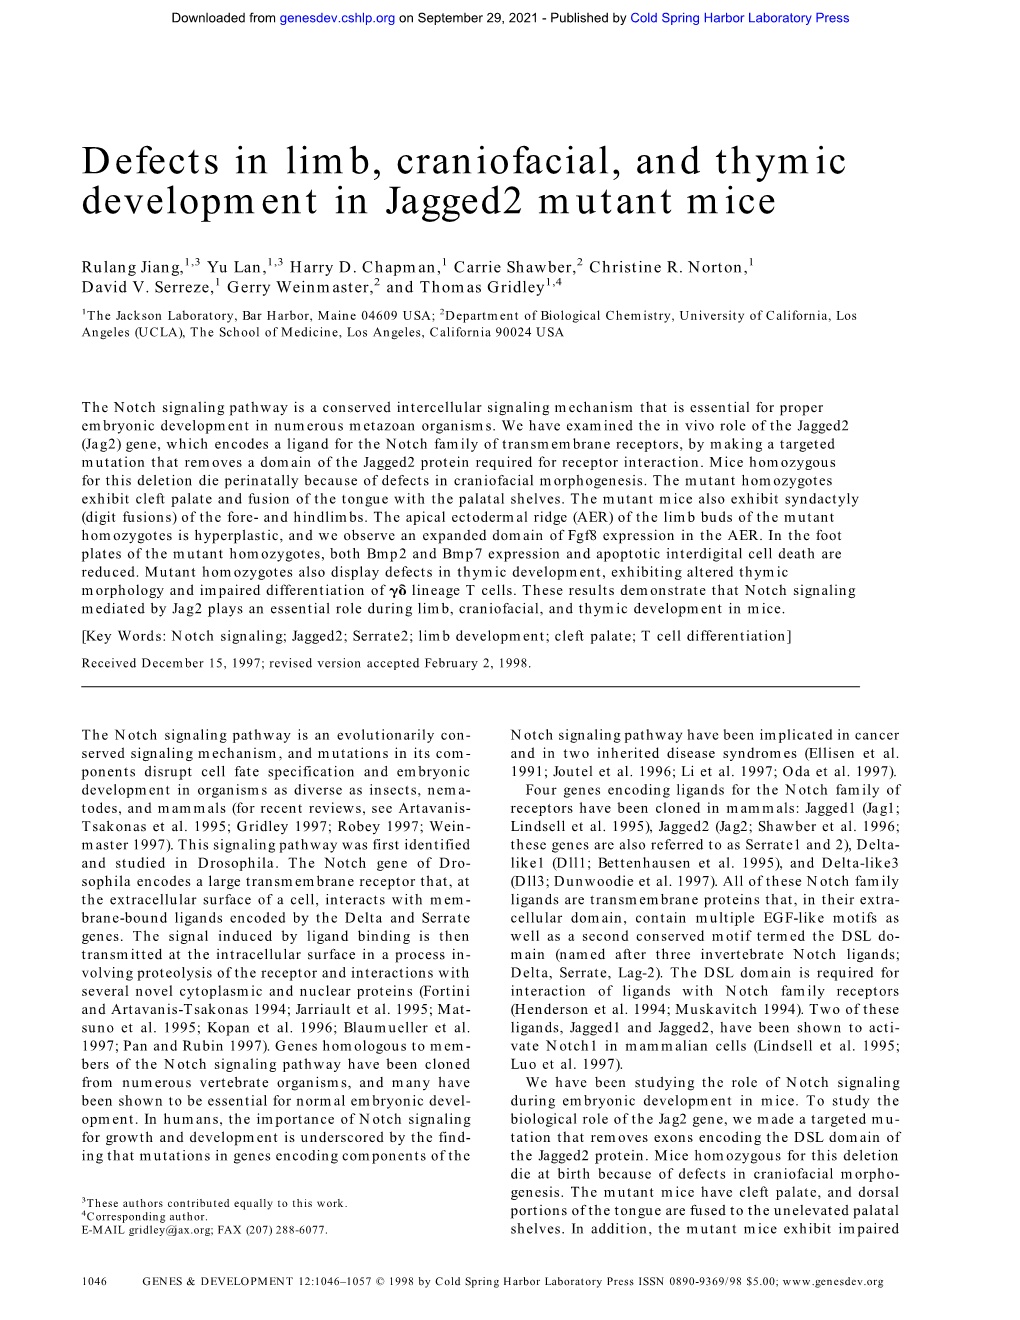 Defects in Limb, Craniofacial, and Thymic Development in Jagged2 Mutant Mice